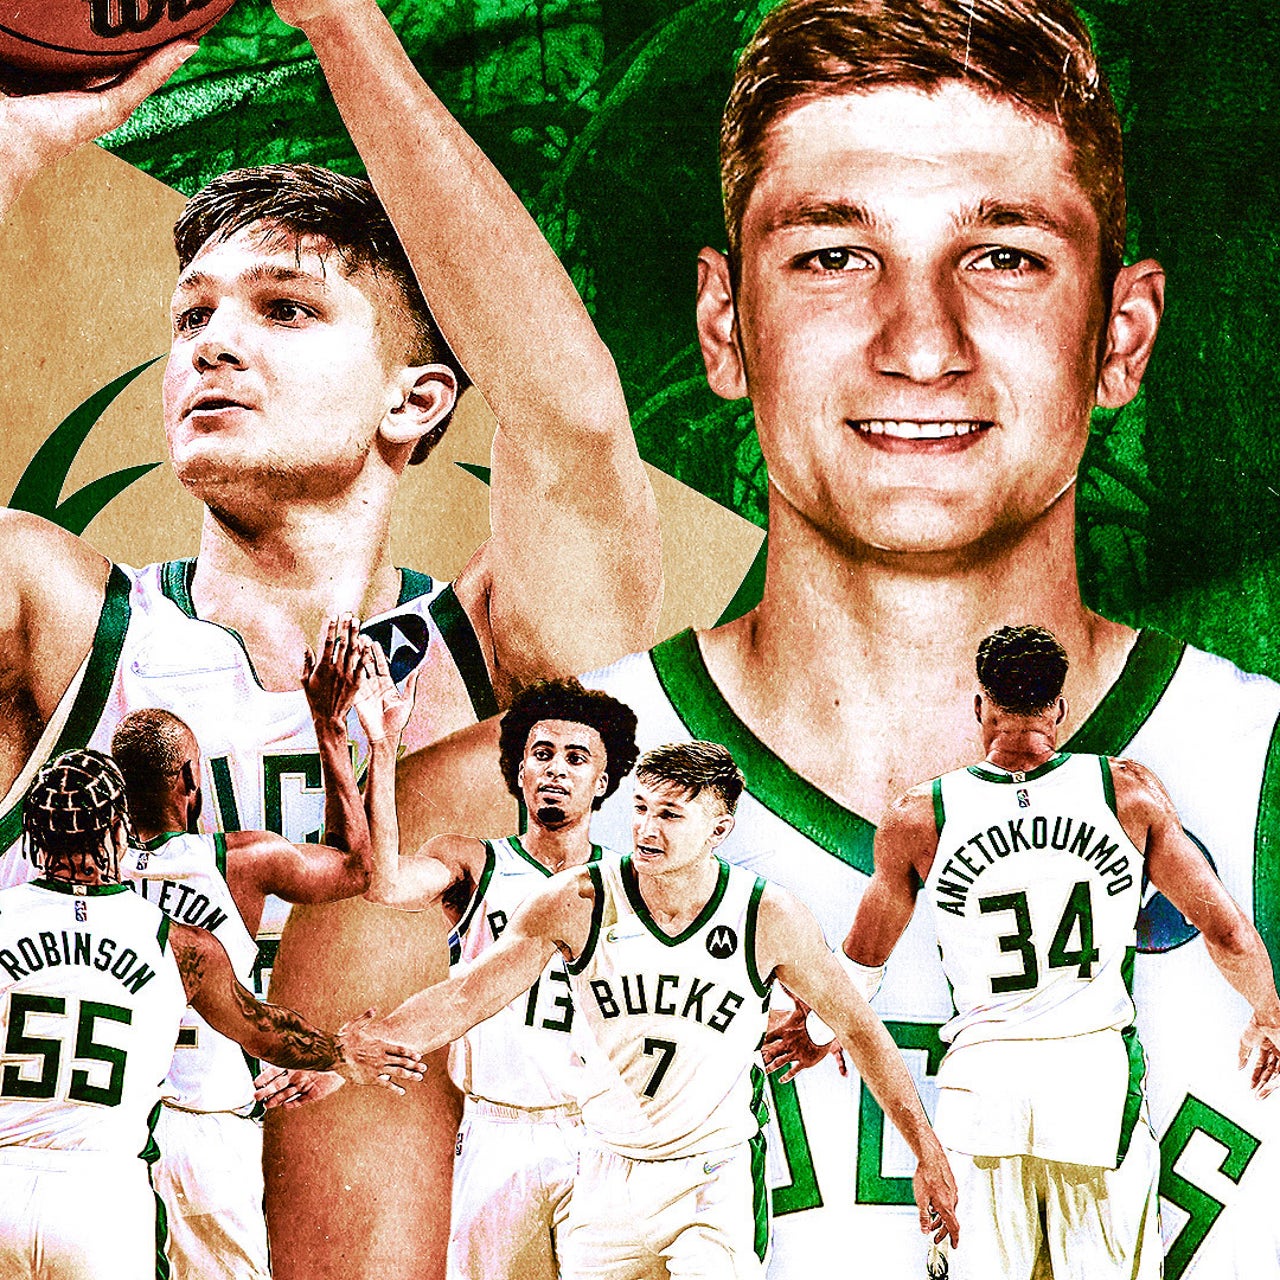 Duke's Grayson Allen shows Jazz during workout why he was such a